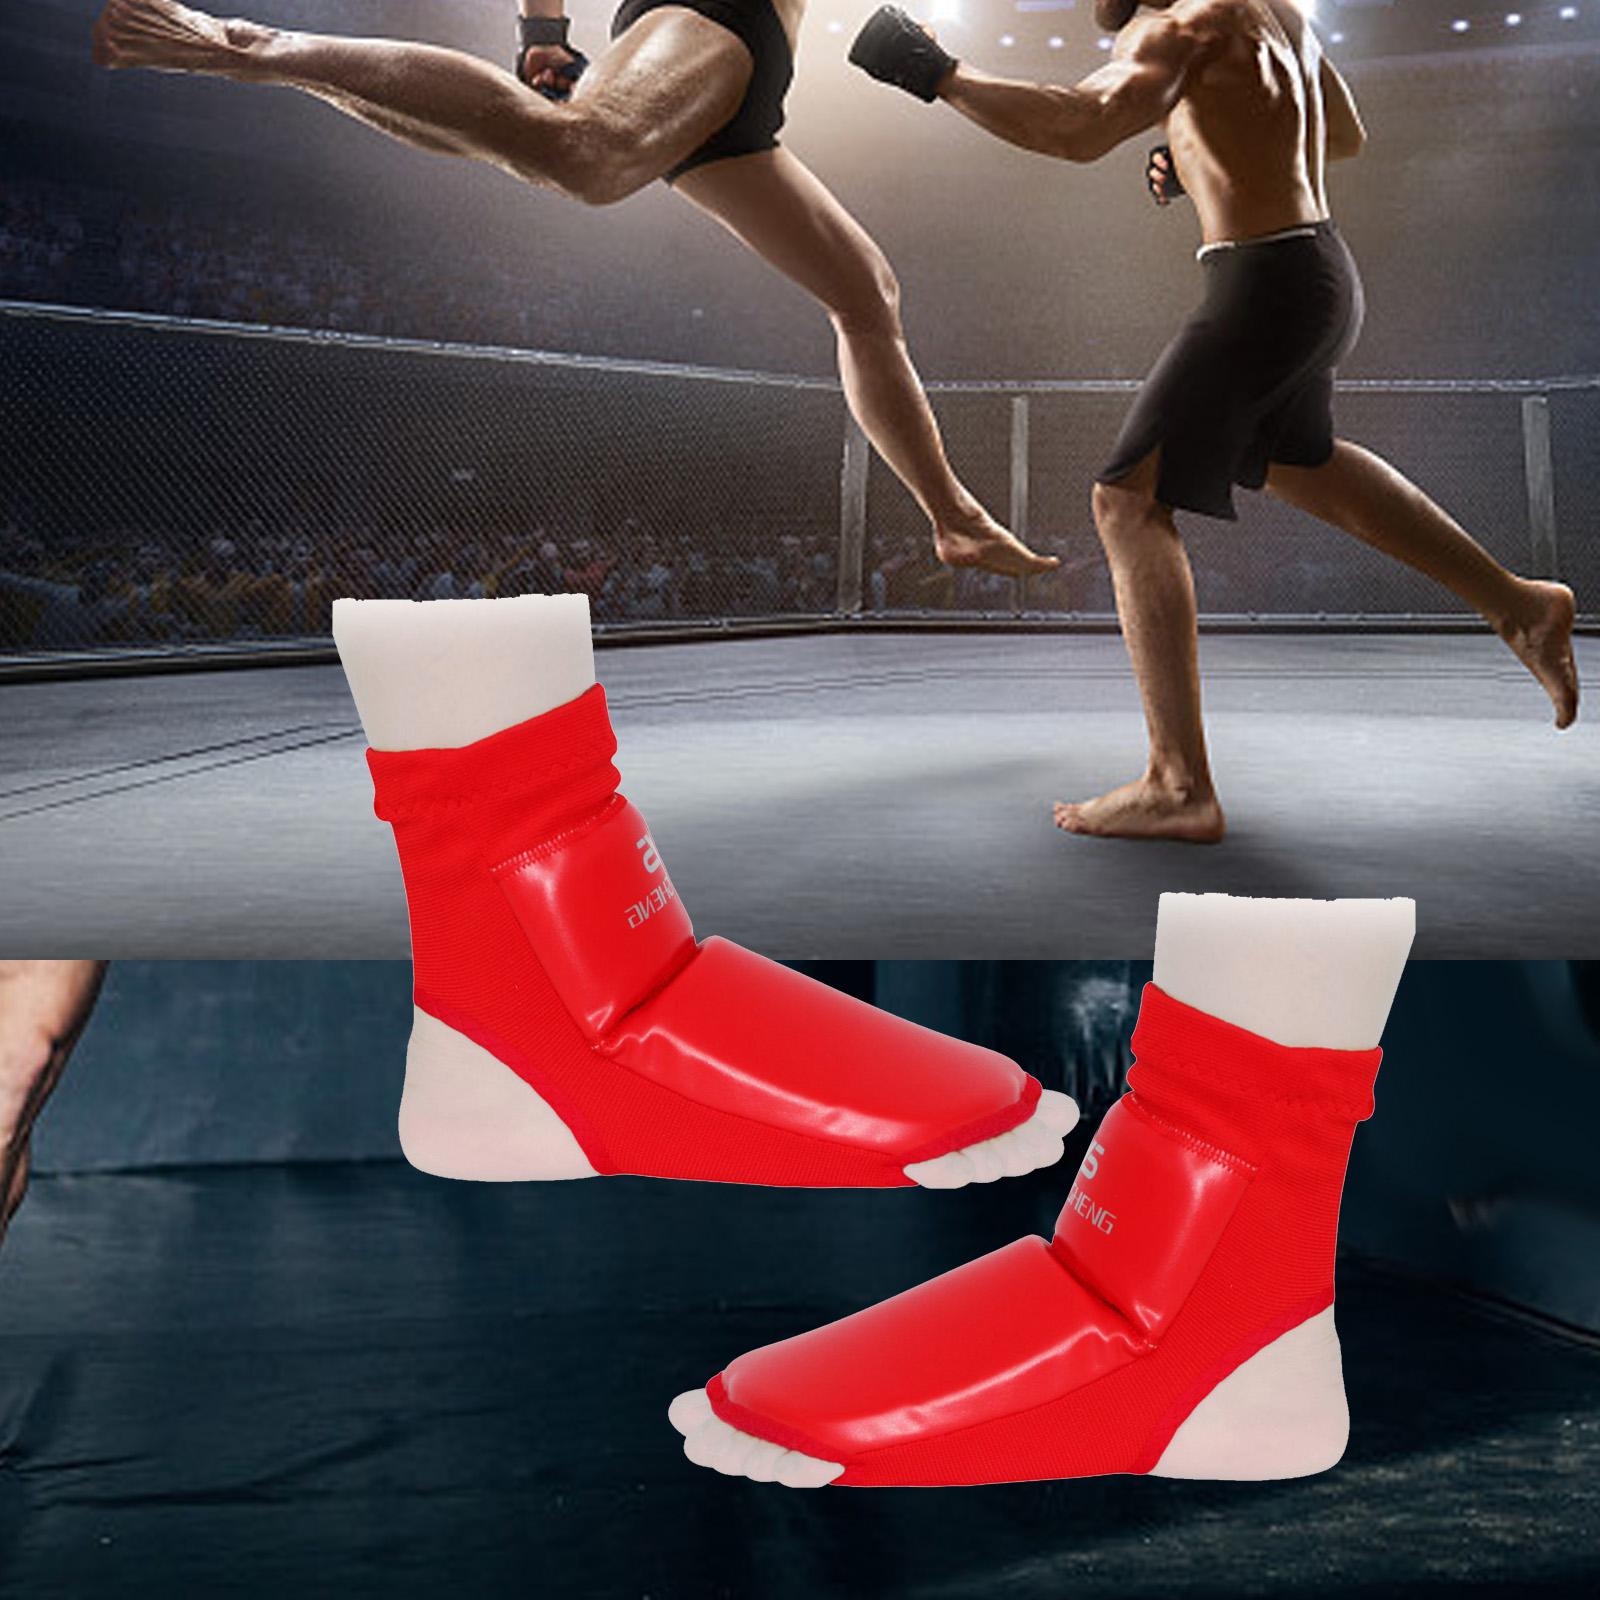 Instep Guard Protective Gear Foot Protector for Kids Adults Boxing Taekwondo L